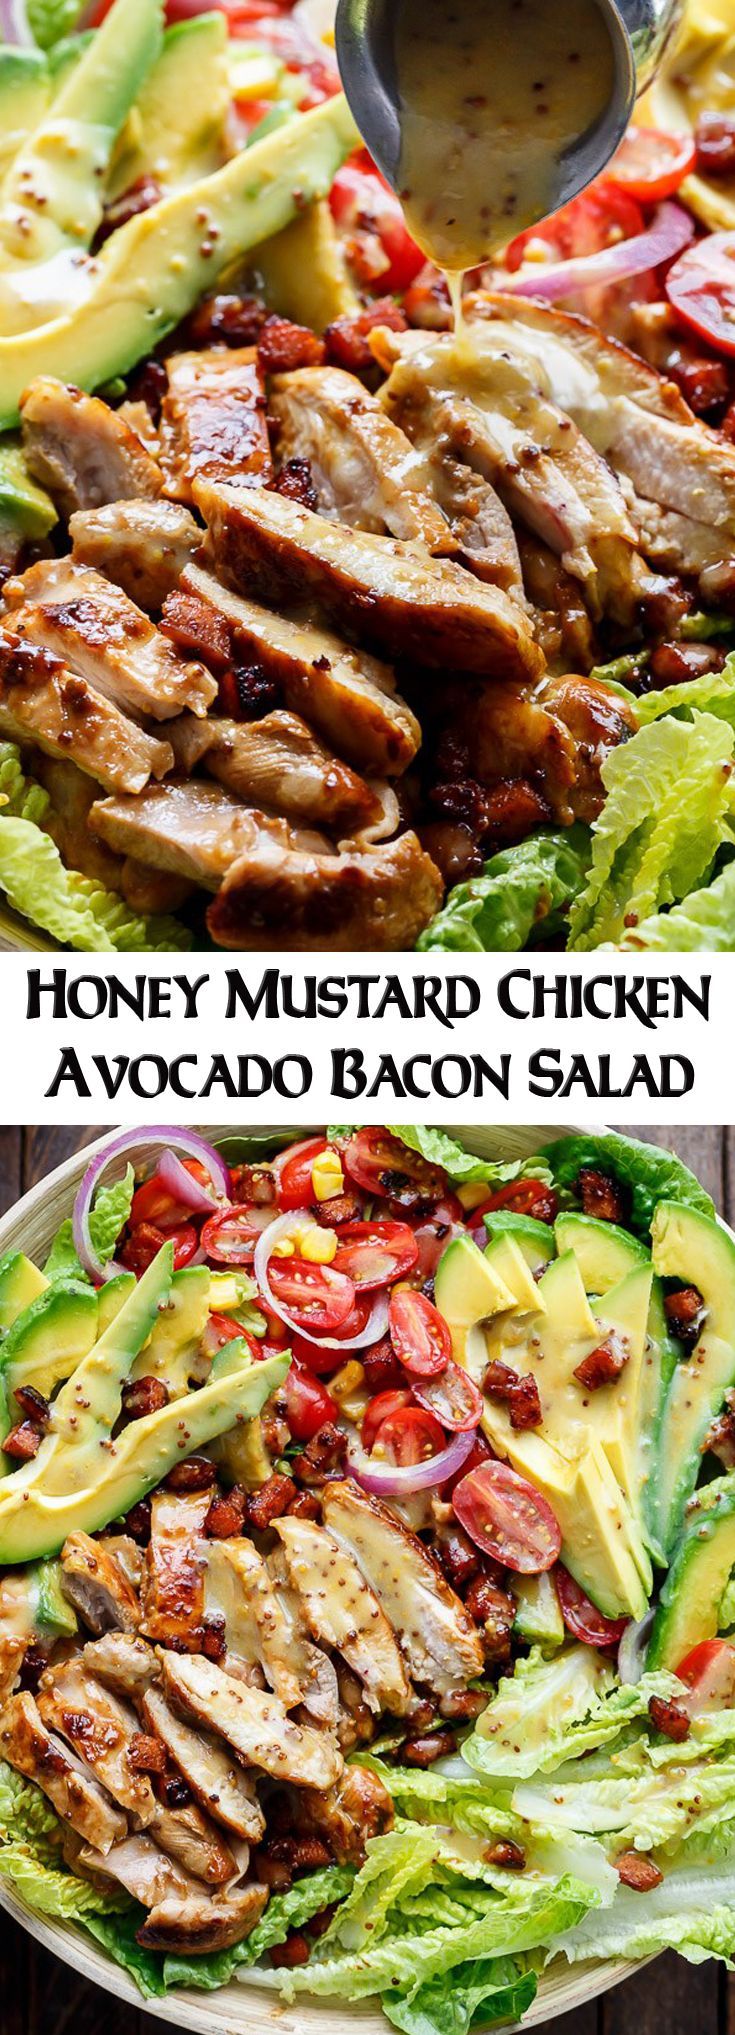 Mustard vinaigrettes are a healthy way to add flavor to salads! -   22 avocado recipes bacon
 ideas